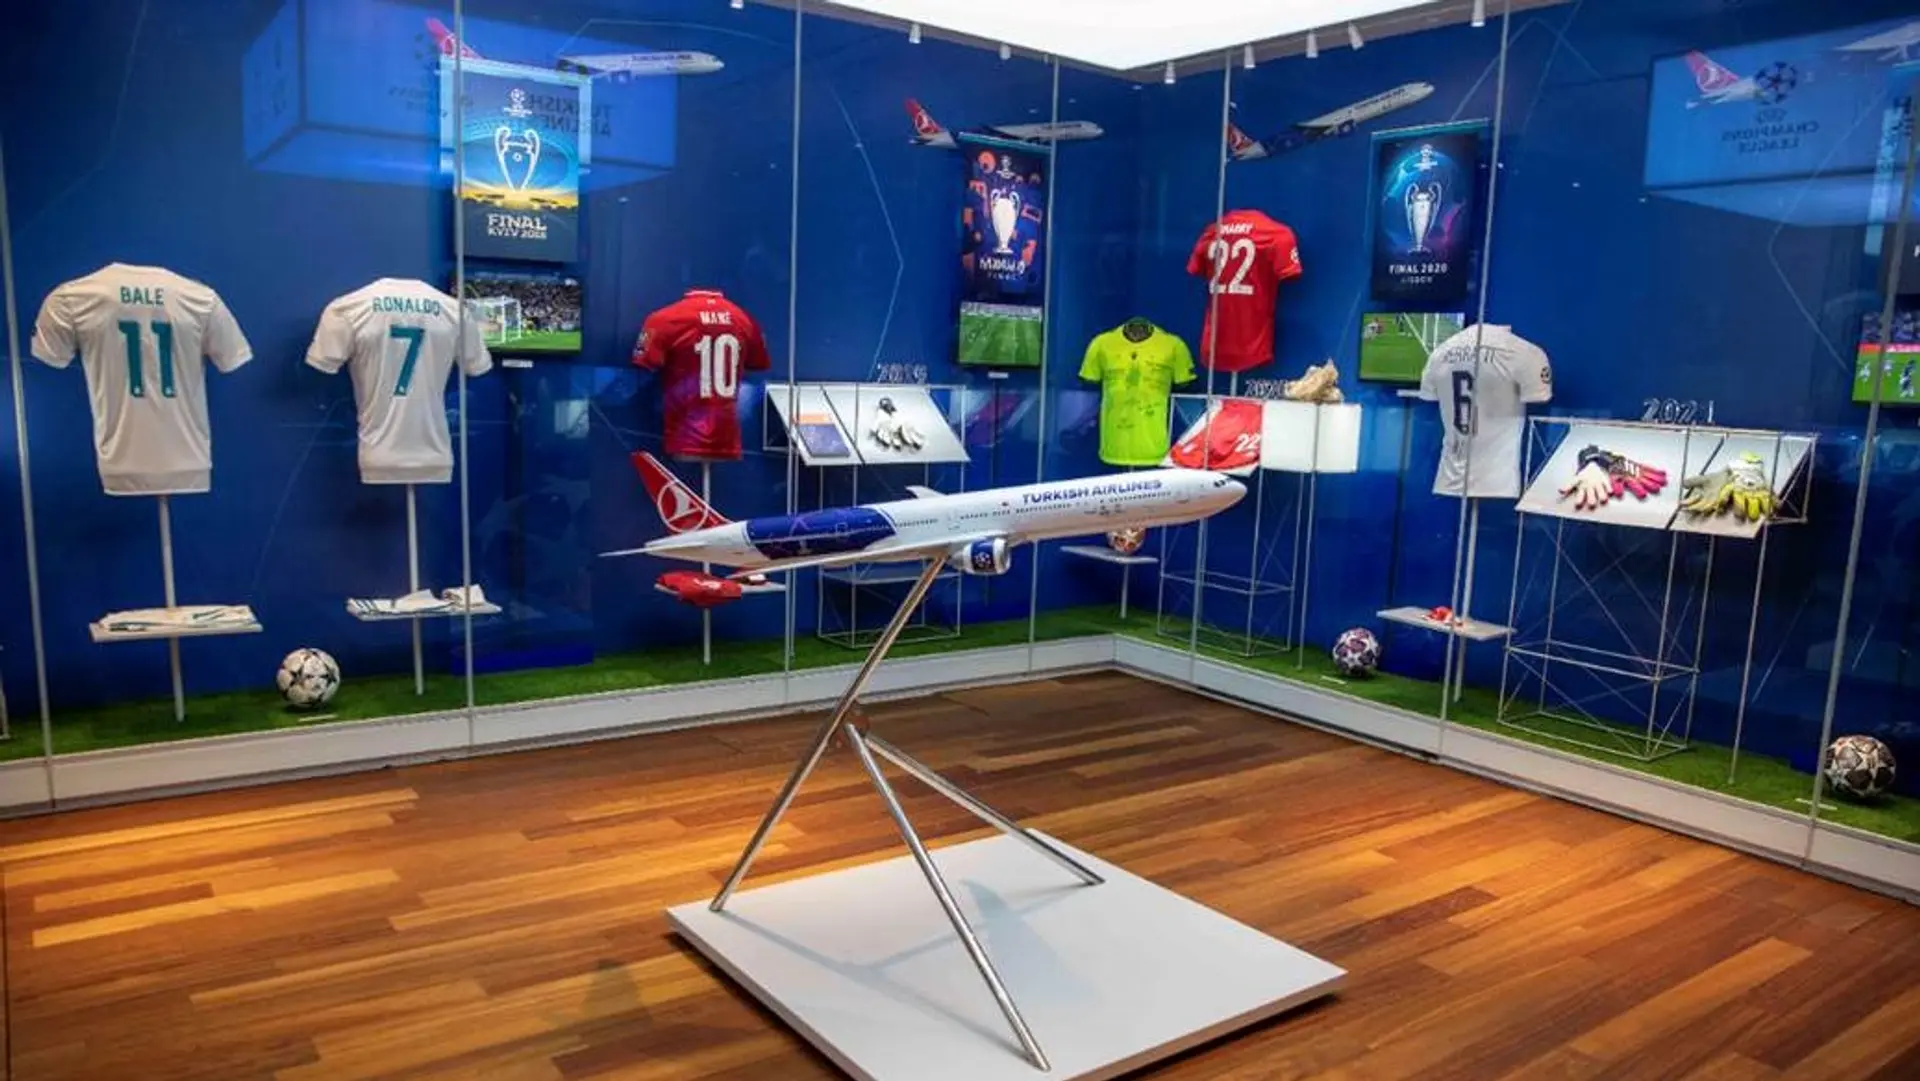 Airlines News - Turkish Airlines opens Champions League airport exhibit